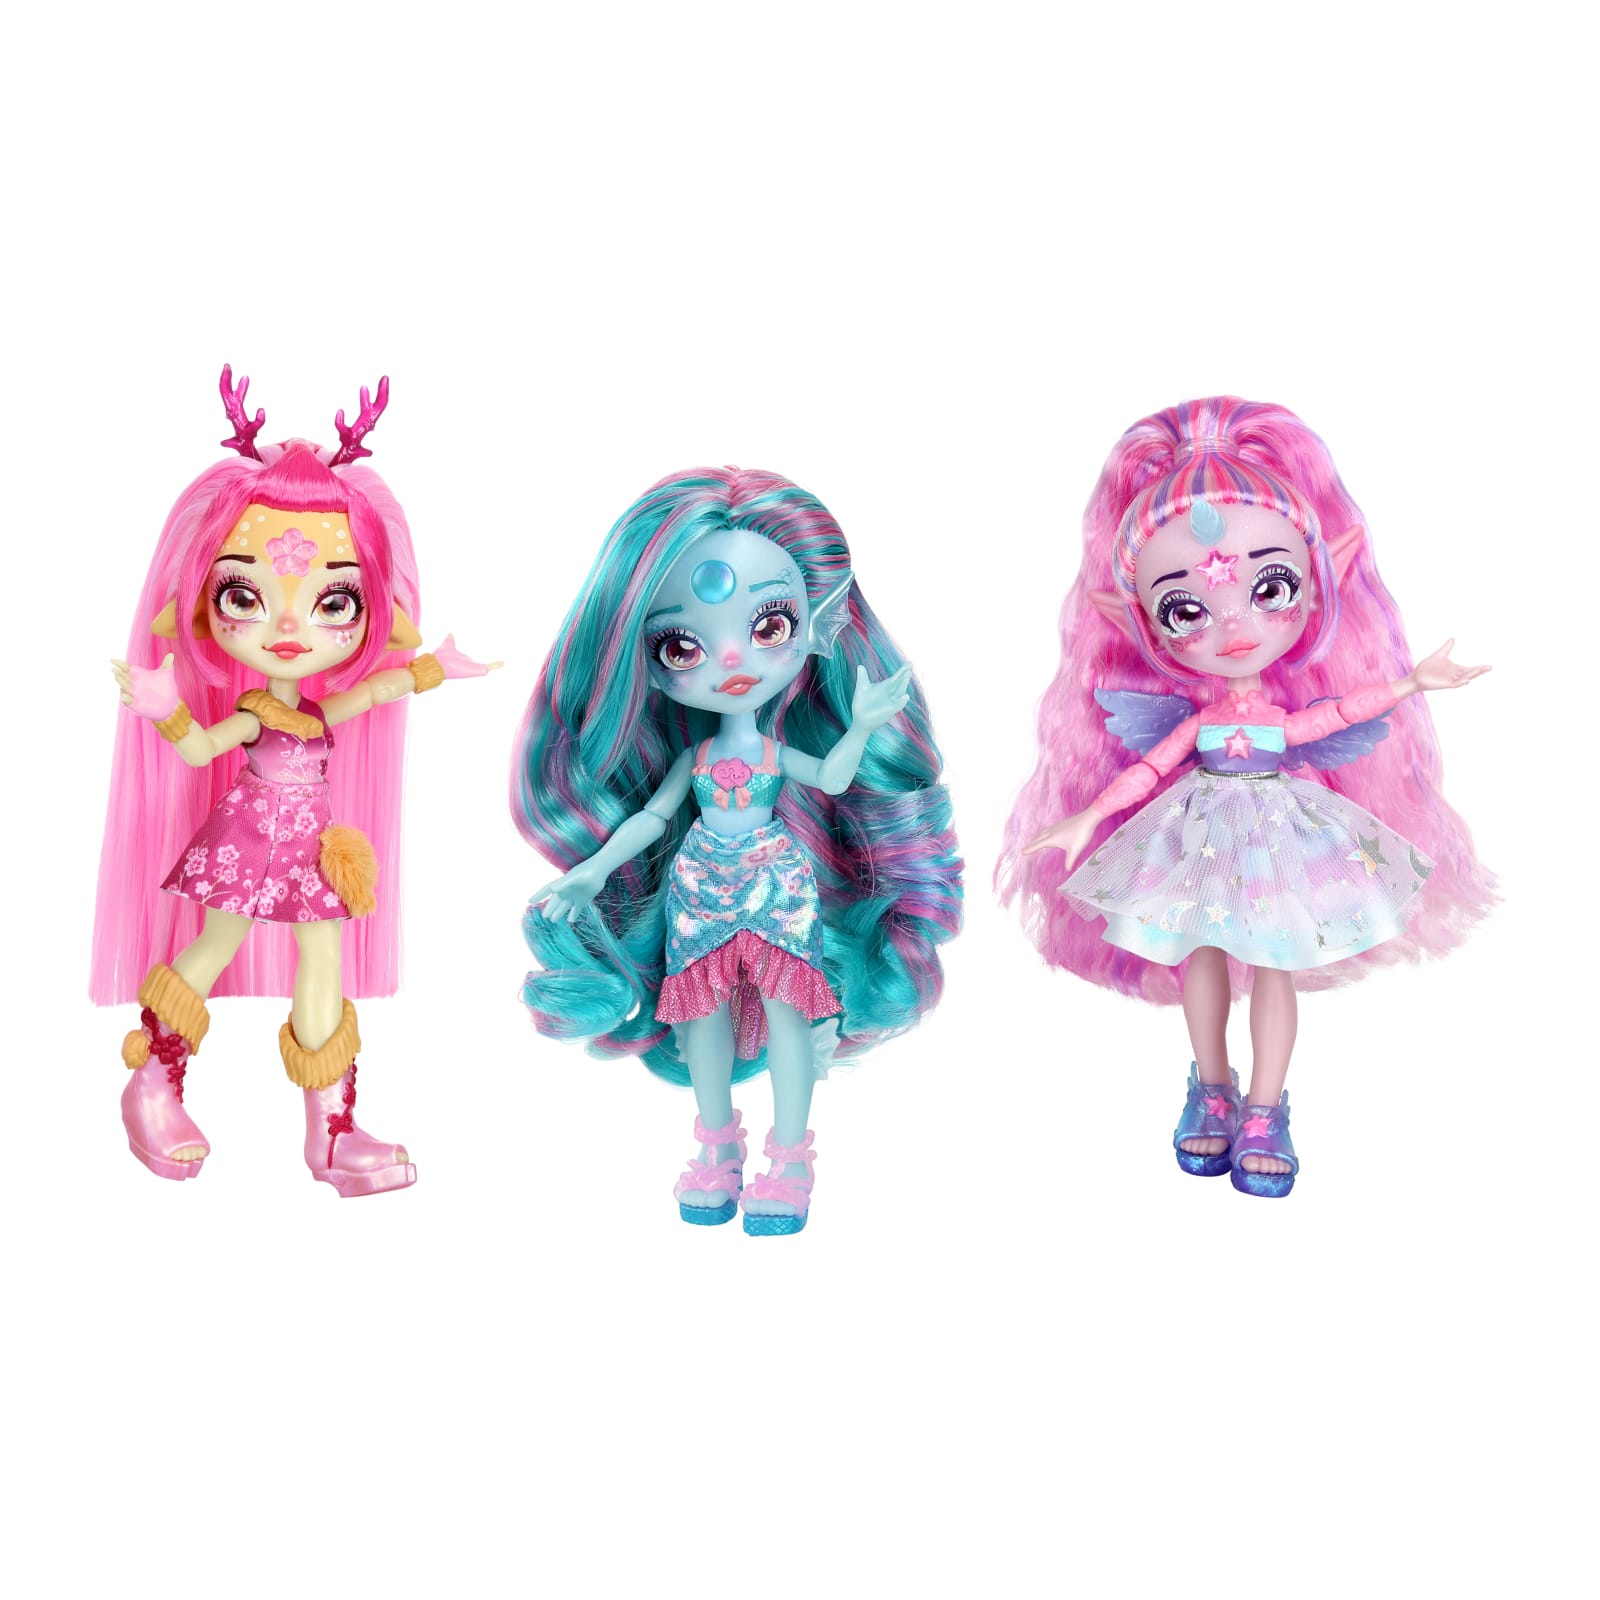 Magic Mixies Pixlings: Beautiful Mini Dolls That Appear in Magic Potion  Bottles! *IN-DEPTH REVIEW* 